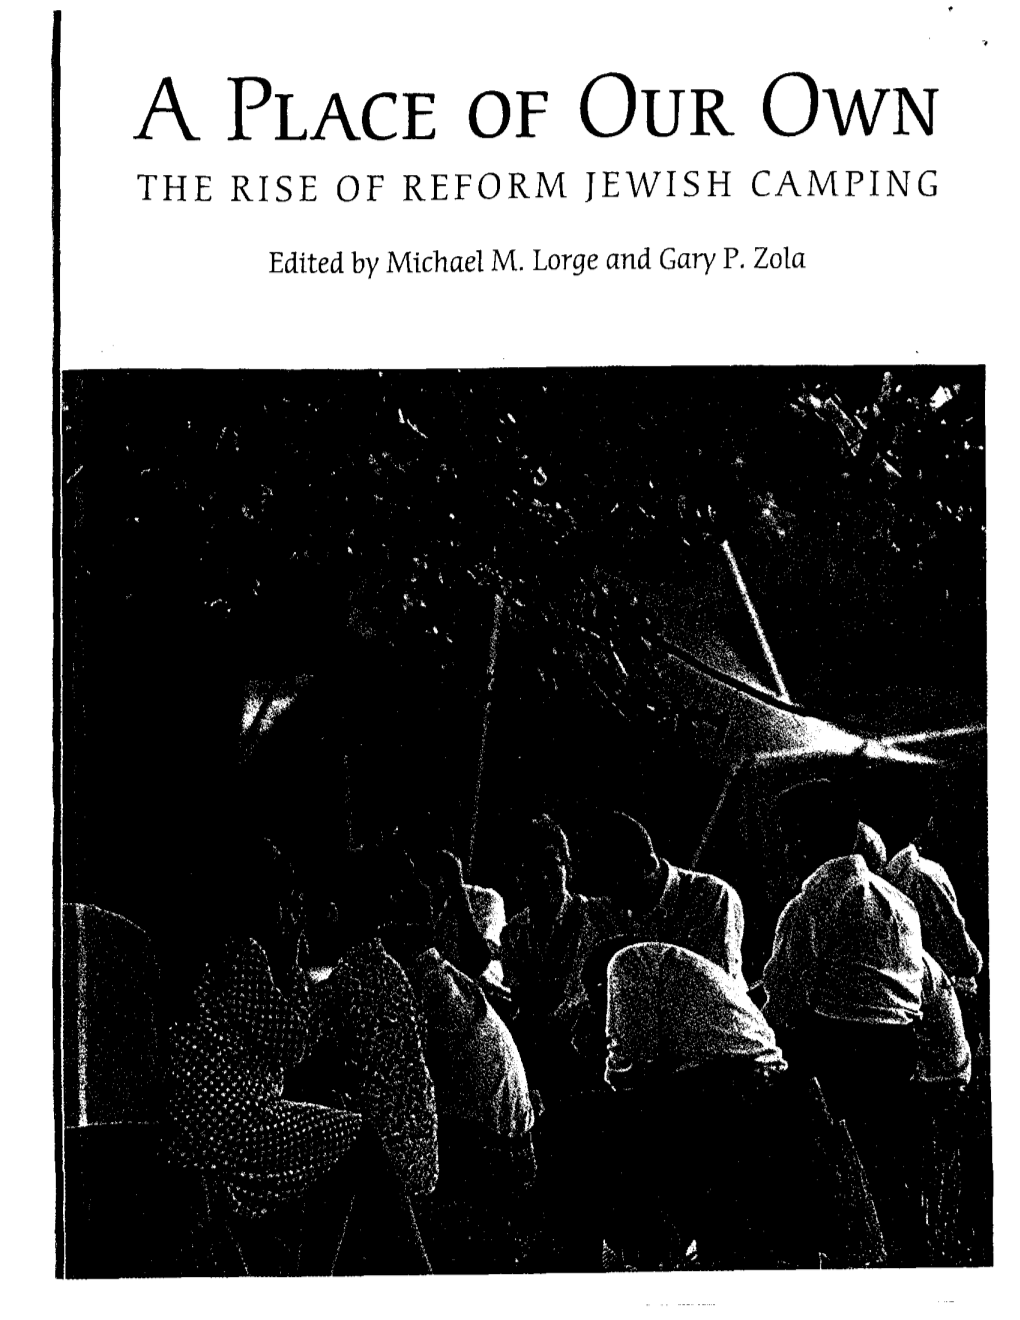 A PLACE of Our Own the RISE of REFORM JEWISH CAMPING